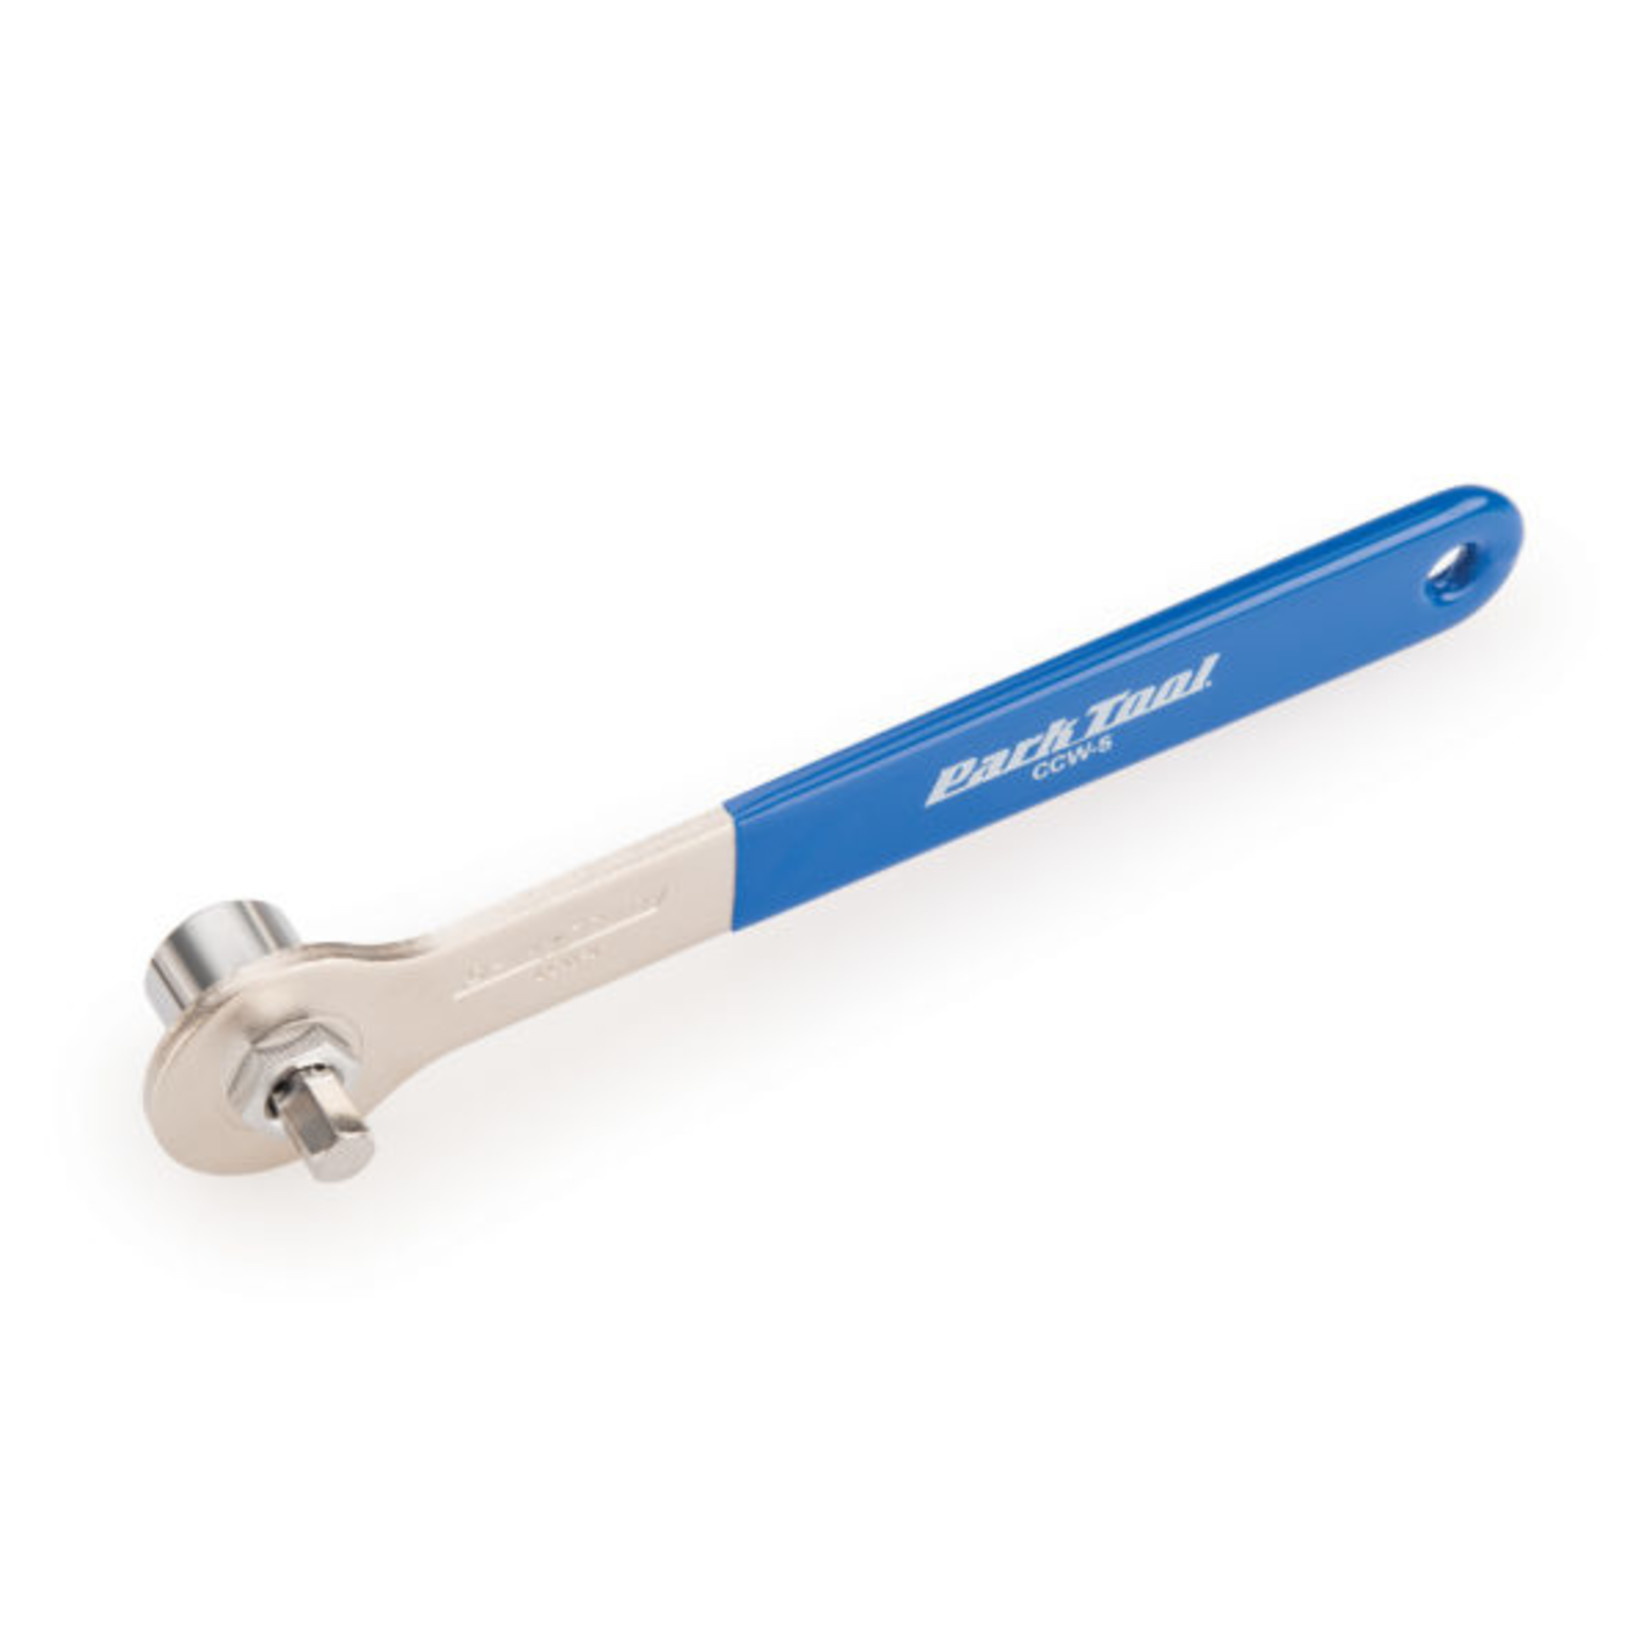 PARK TOOL CCW5 14mm/8mm